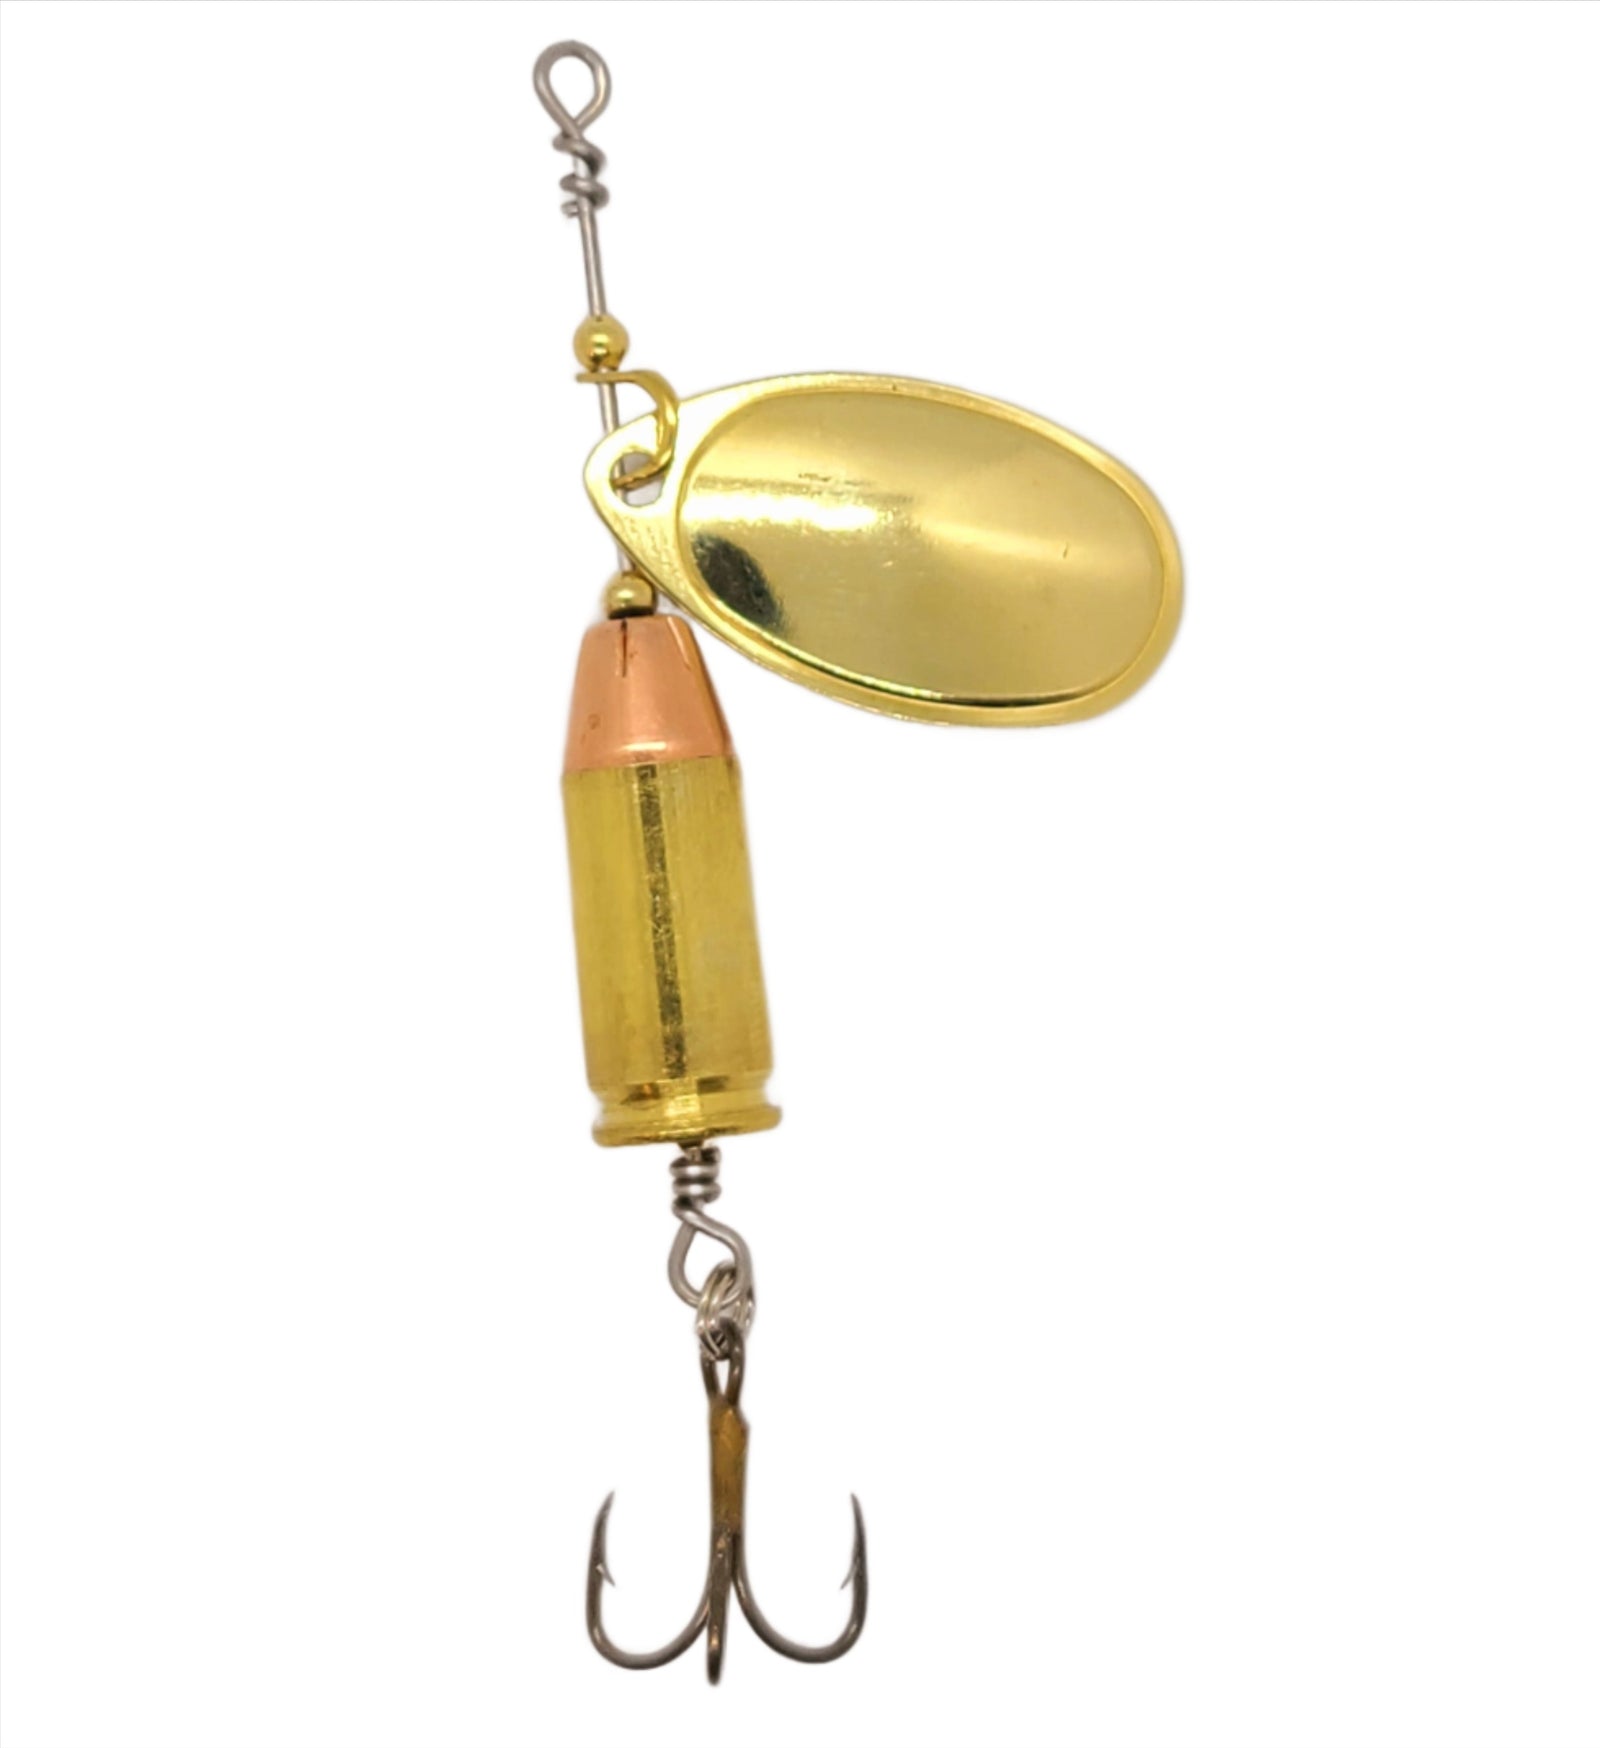 Home page Tagged fishing lures - Get'n Hook'd Lures